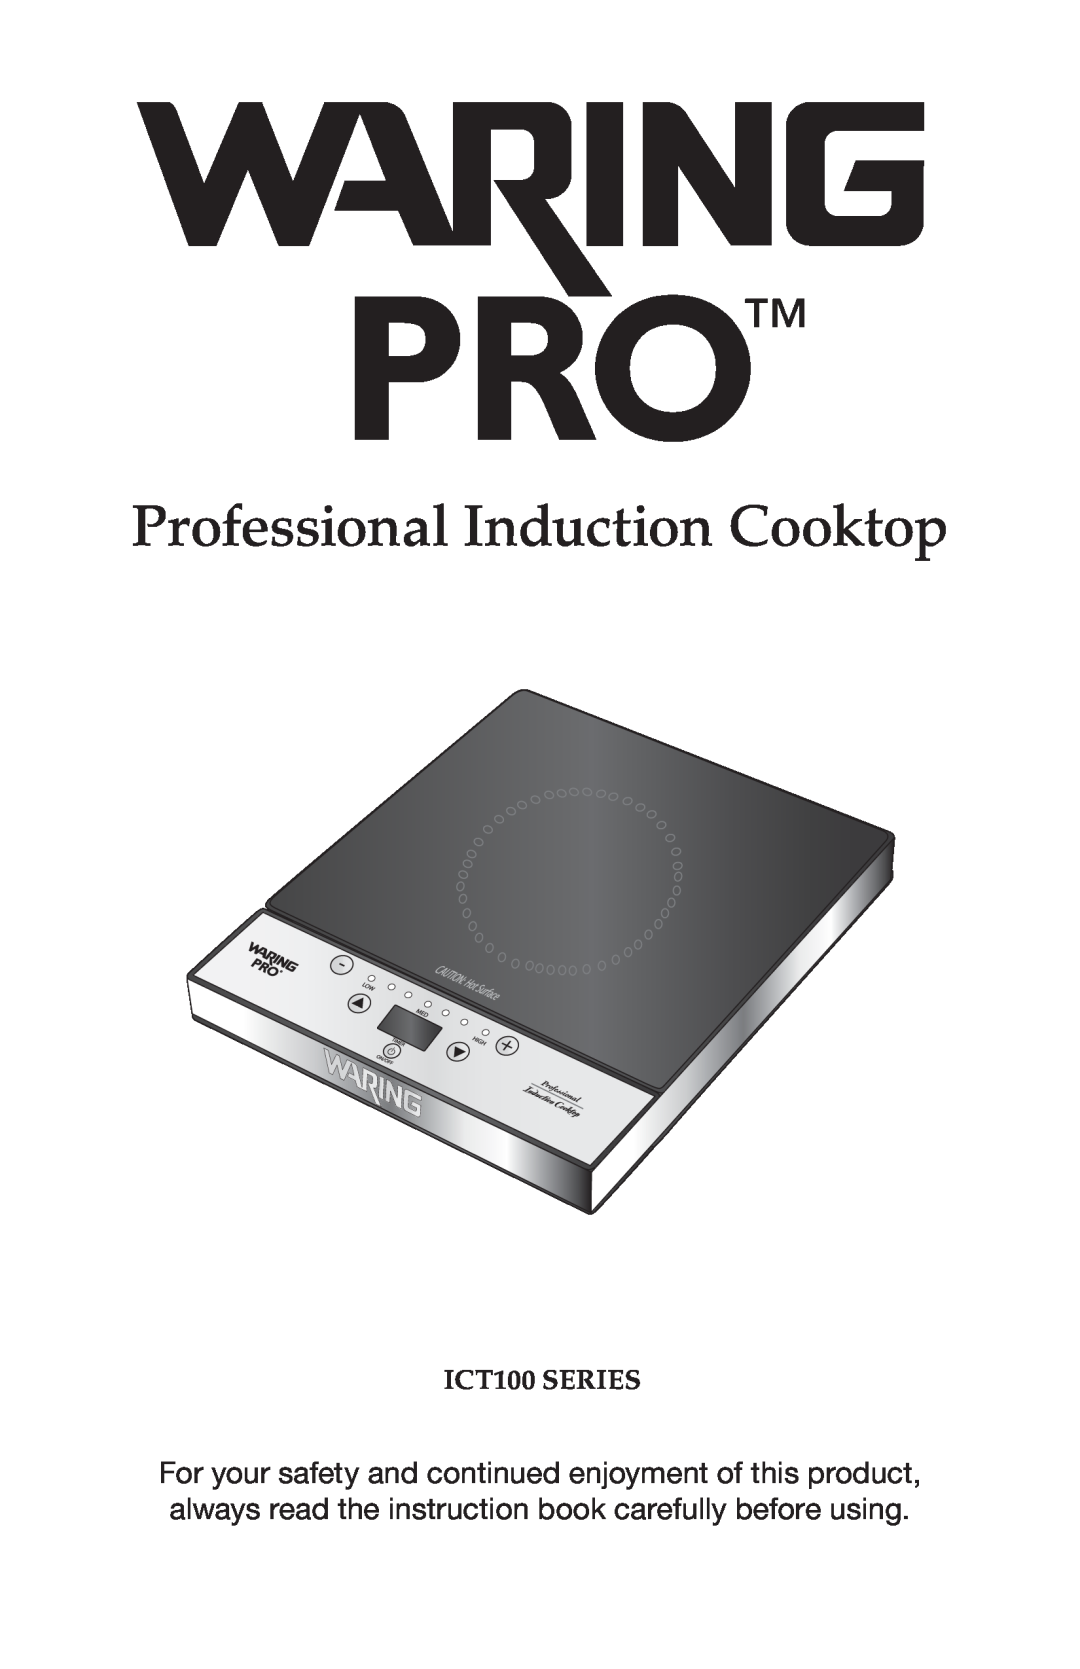 Waring manual Professional Induction Cooktop, ICT100 SERIES 